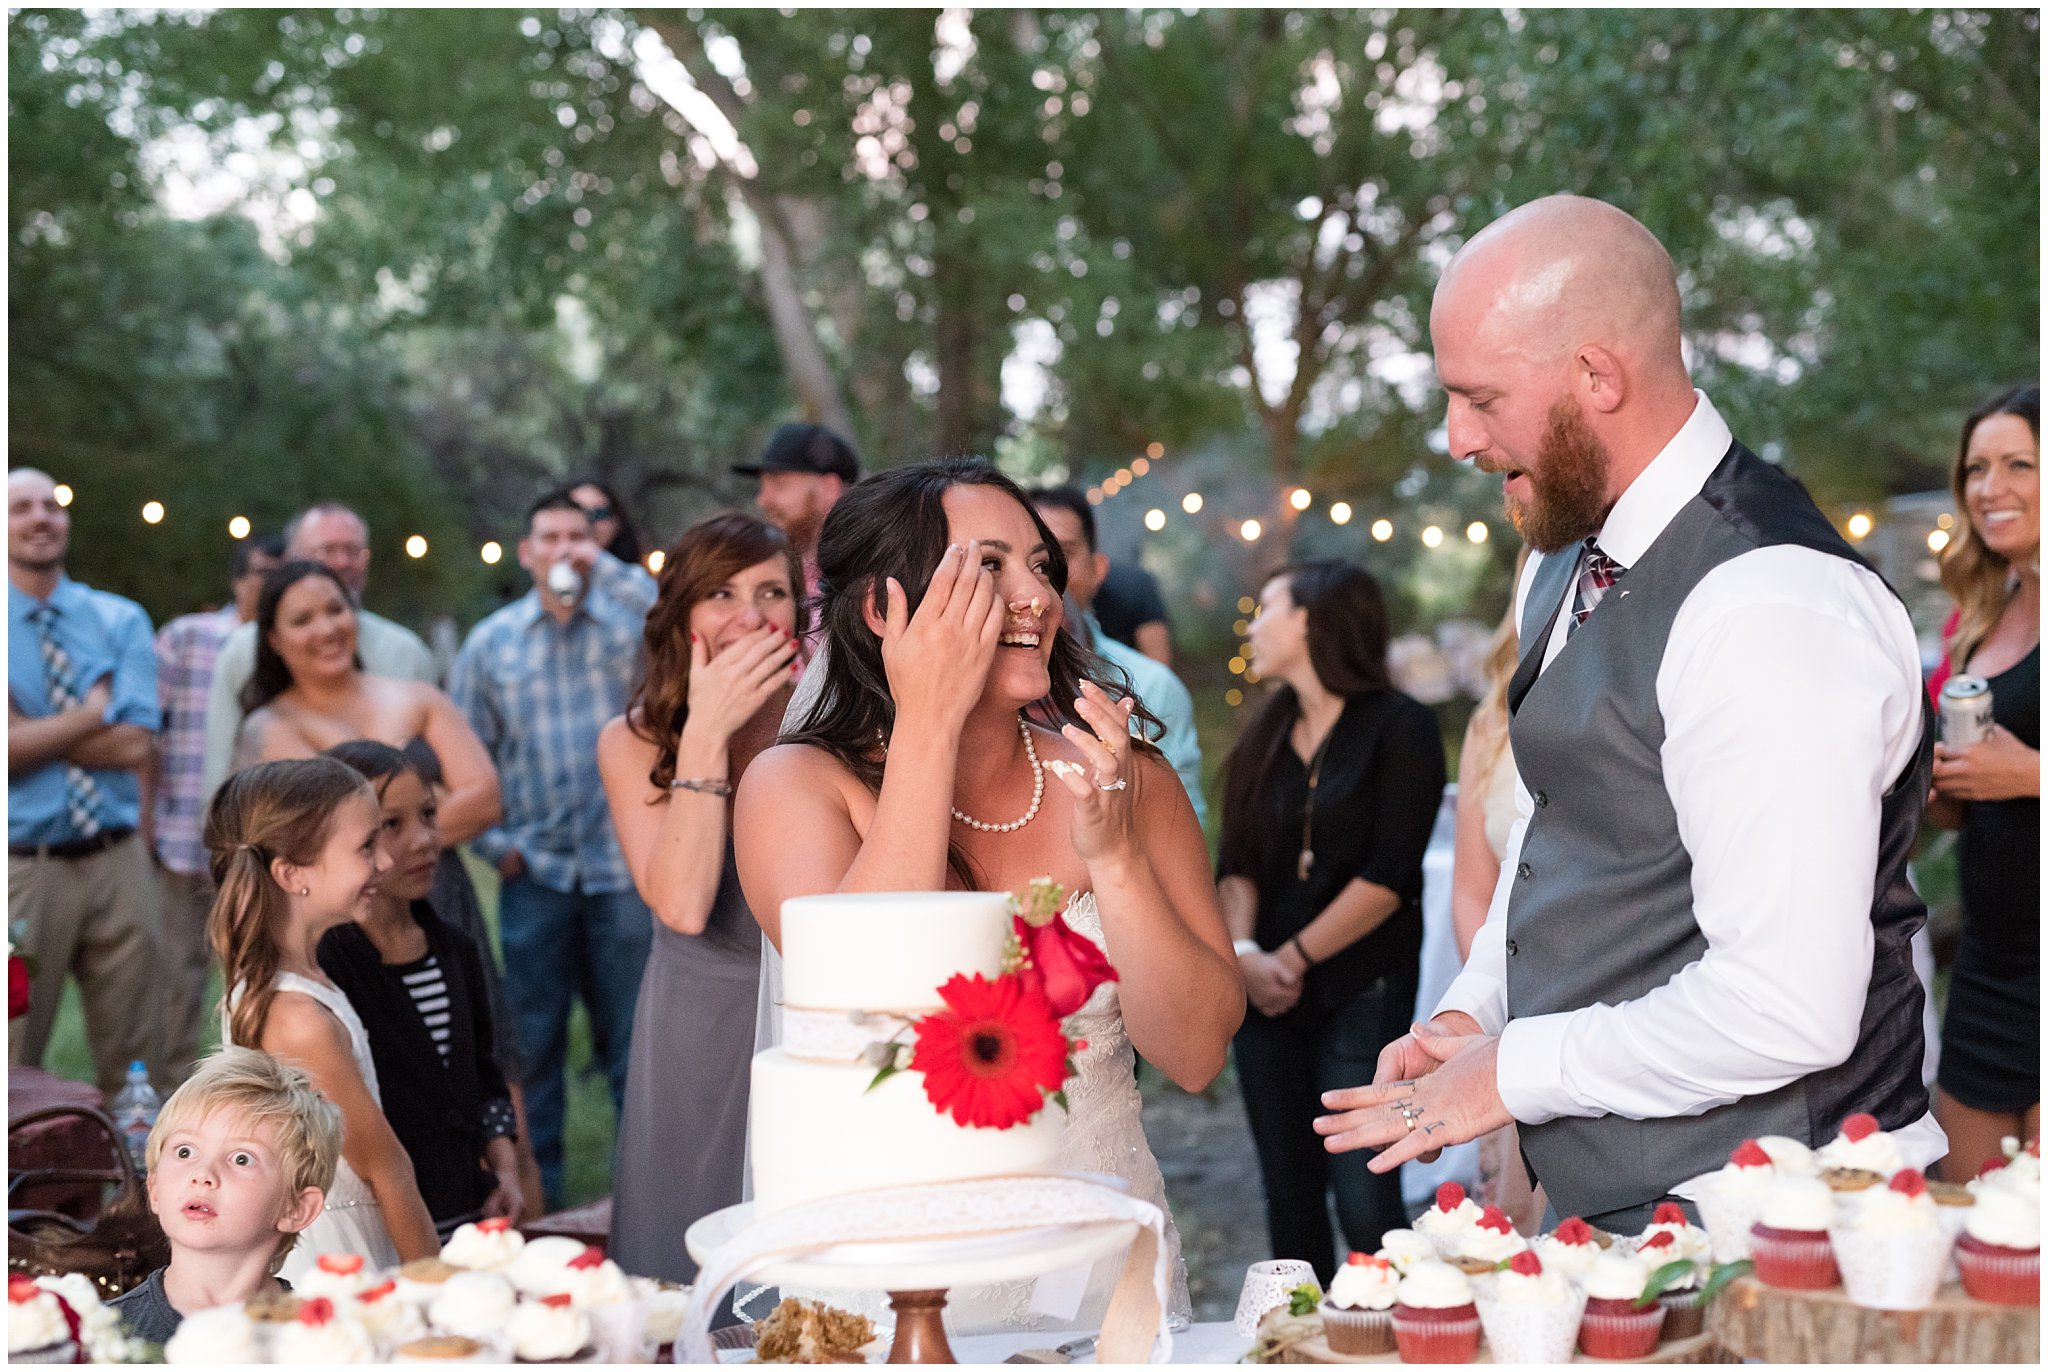 Bride and groom covered in cake during cake cutting | Red and Grey wedding | Davis County Outdoor Wedding | Jessie and Dallin Photography